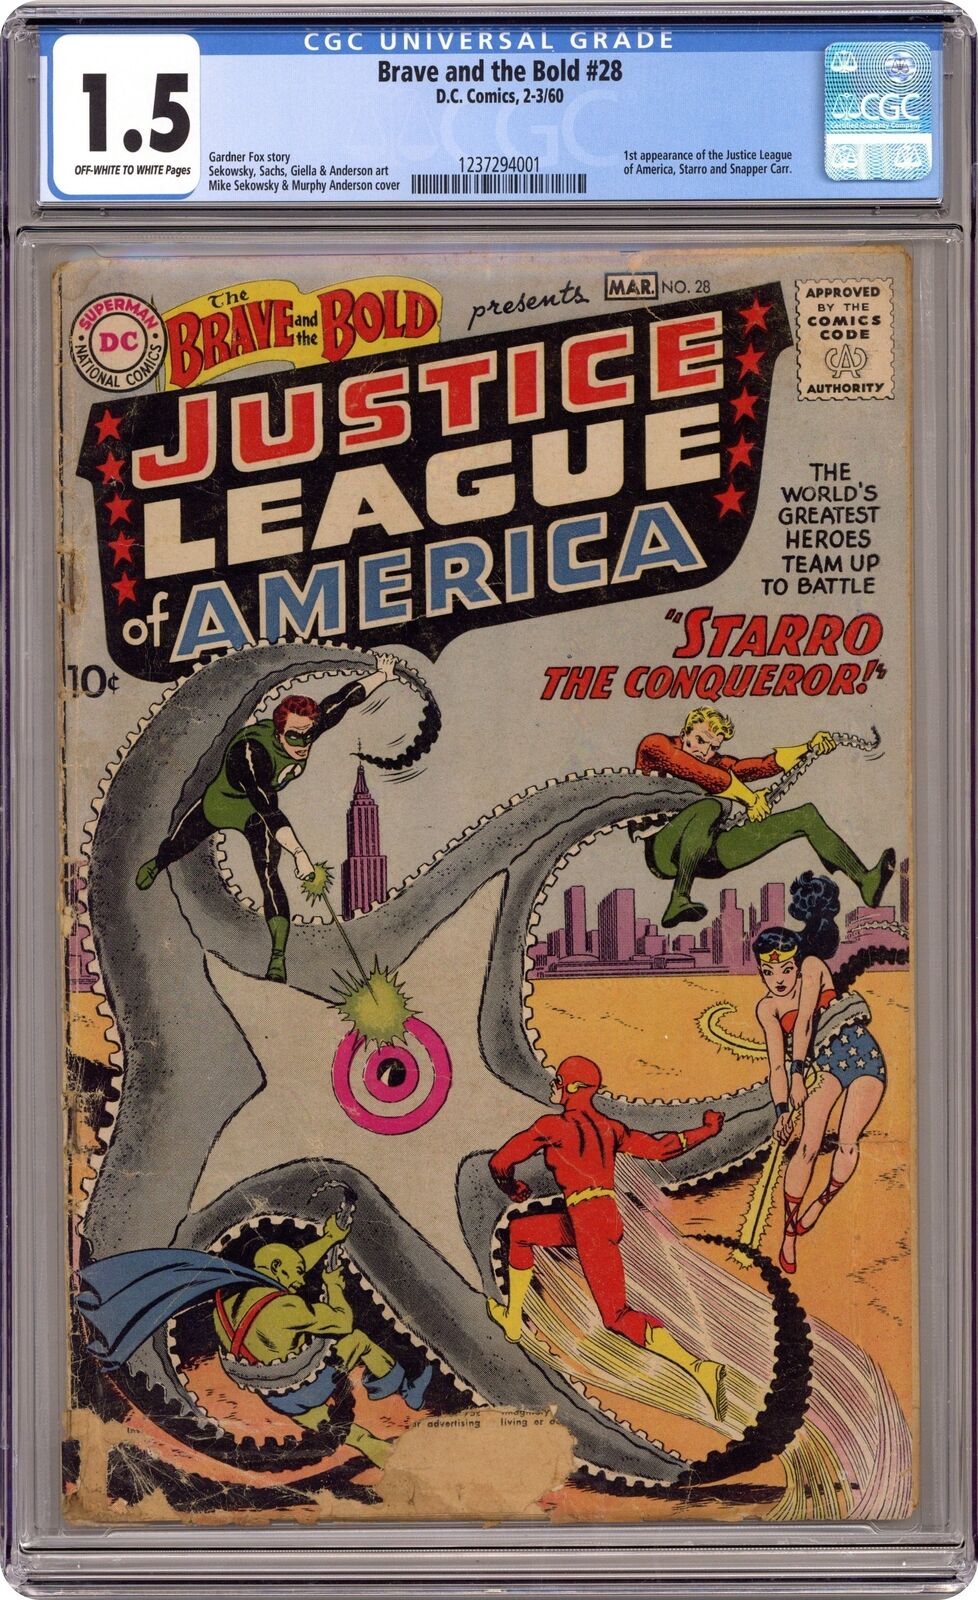 Brave and the Bold #28 CGC 1.5 1960 1237294001 1st Justice League of America